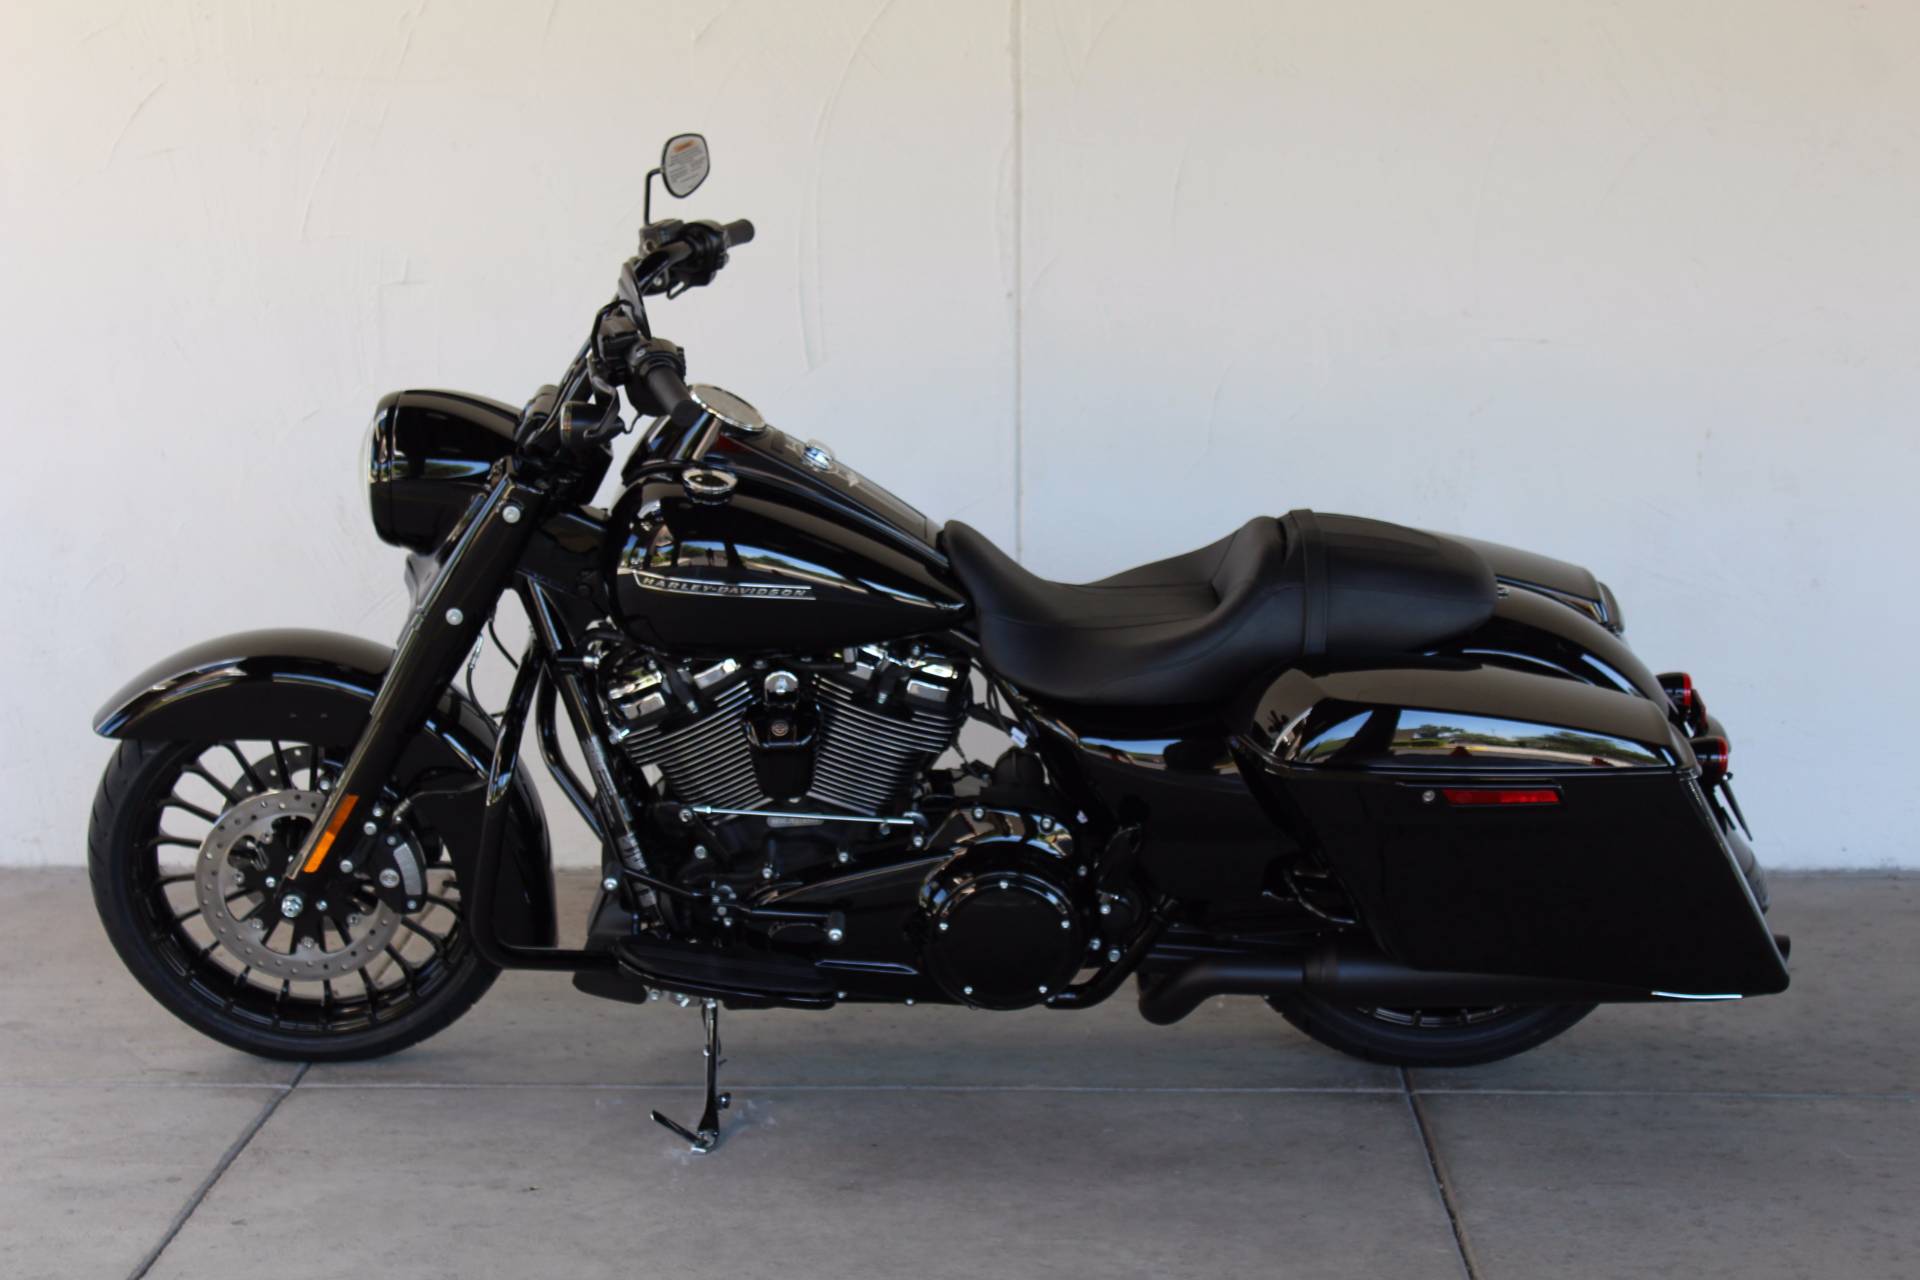  2019 Harley Davidson Road King Special Motorcycles Apache 